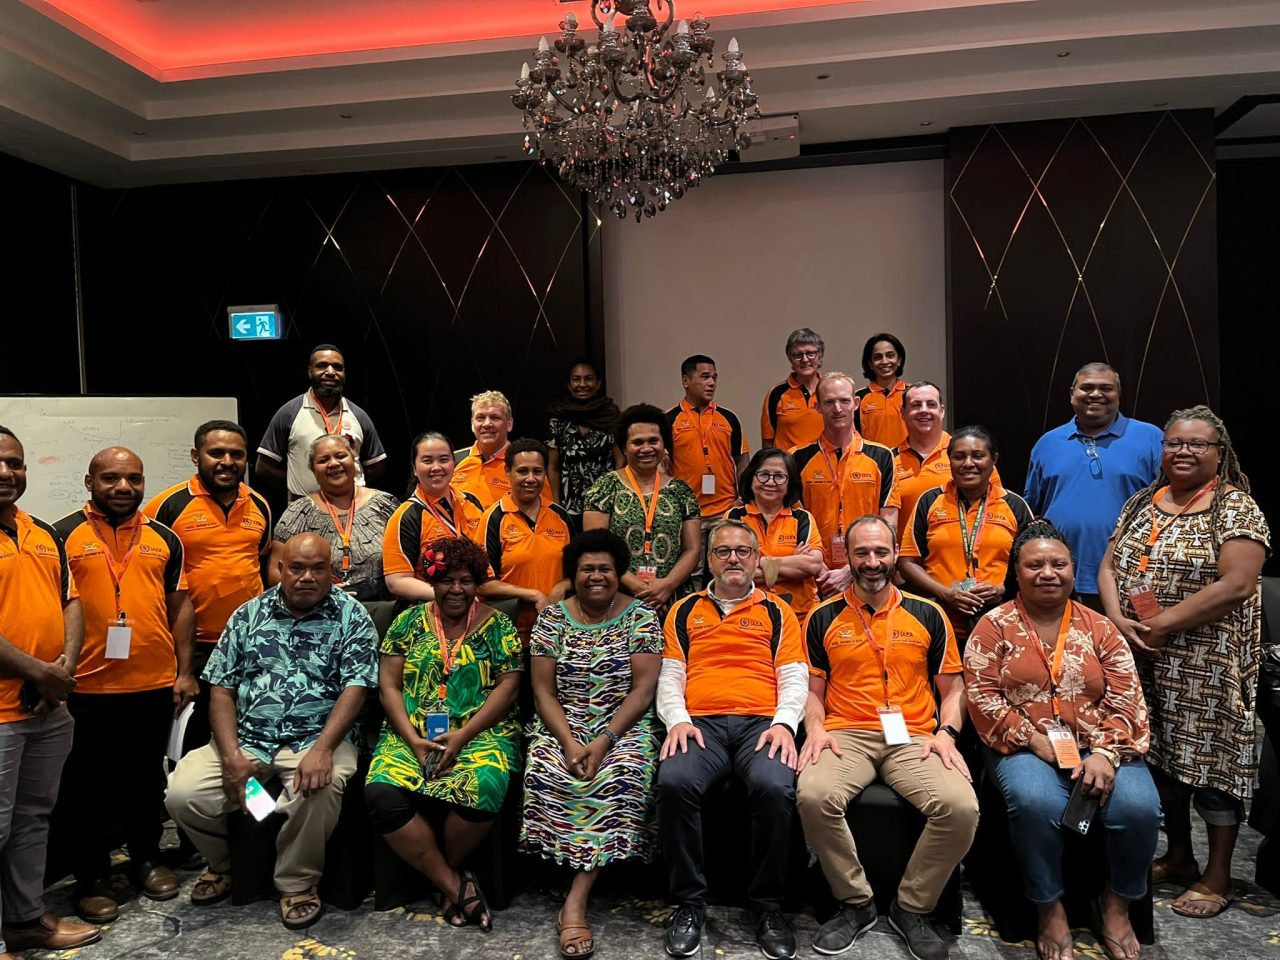 Jeremy Slone: I was honored to address delegates of the Medical Society of Papua New Guinea Annual Symposium on prioritizing childhood cancer in national cancer control planning.